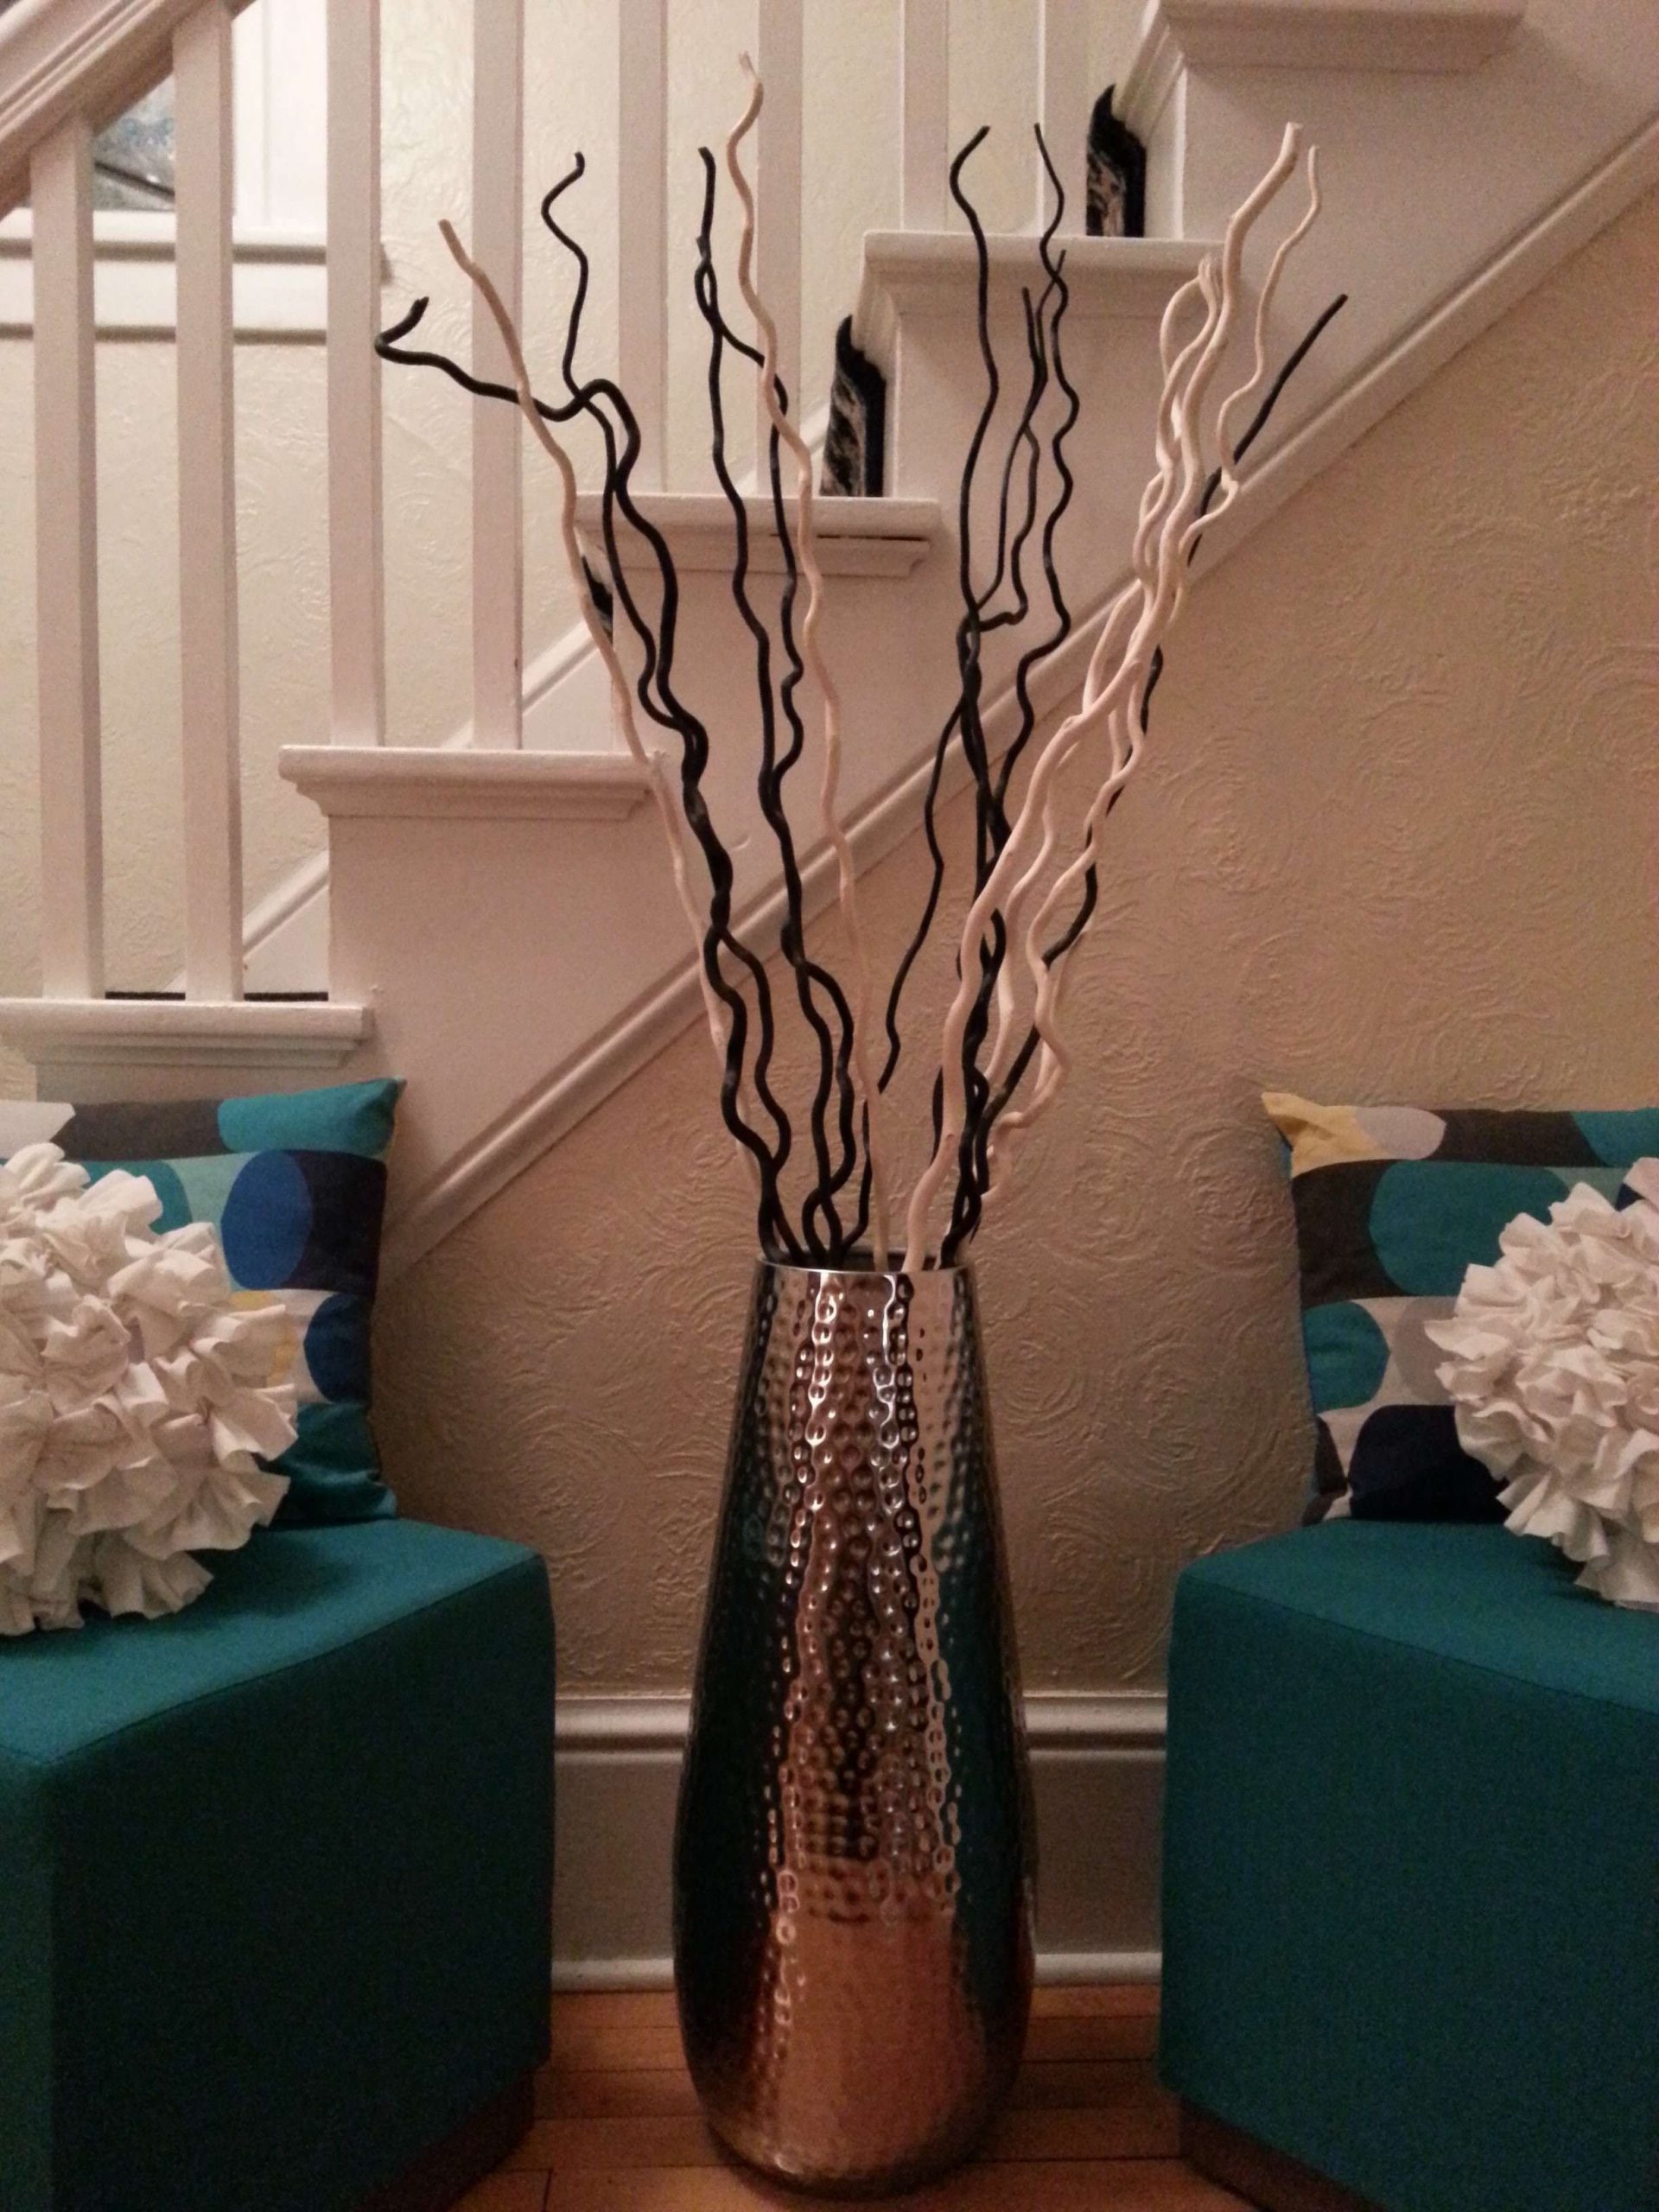 21 Amazing Tall Floor Vase With Branches Decorative Vase Ideas in dimensions 2448 X 3264